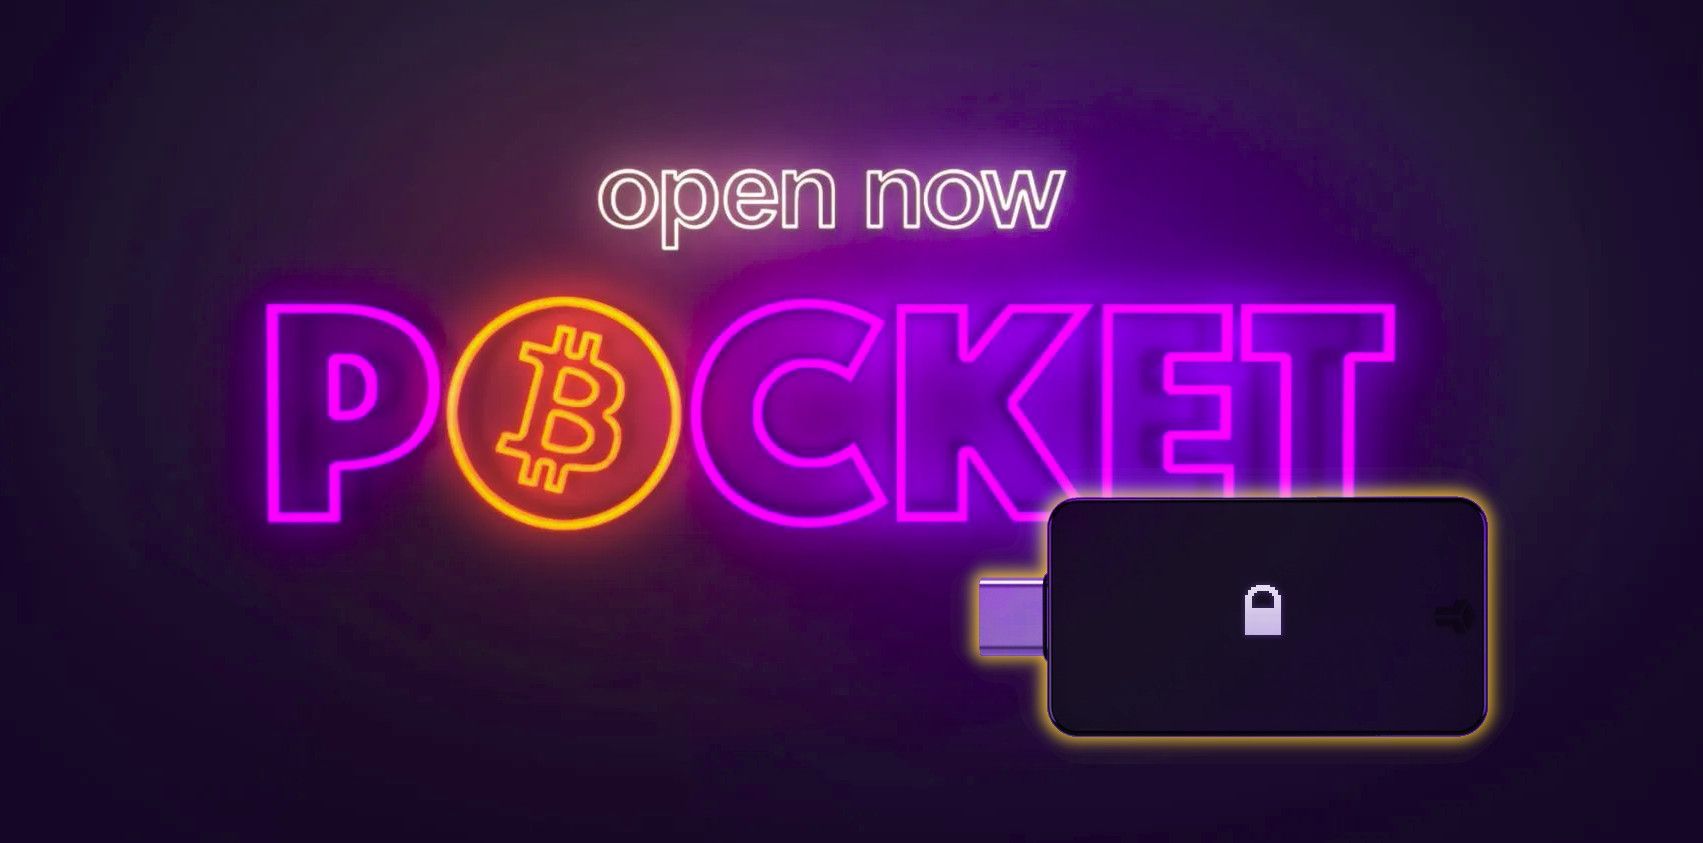 Stack bitcoin directly into your BitBox02 using Pocket